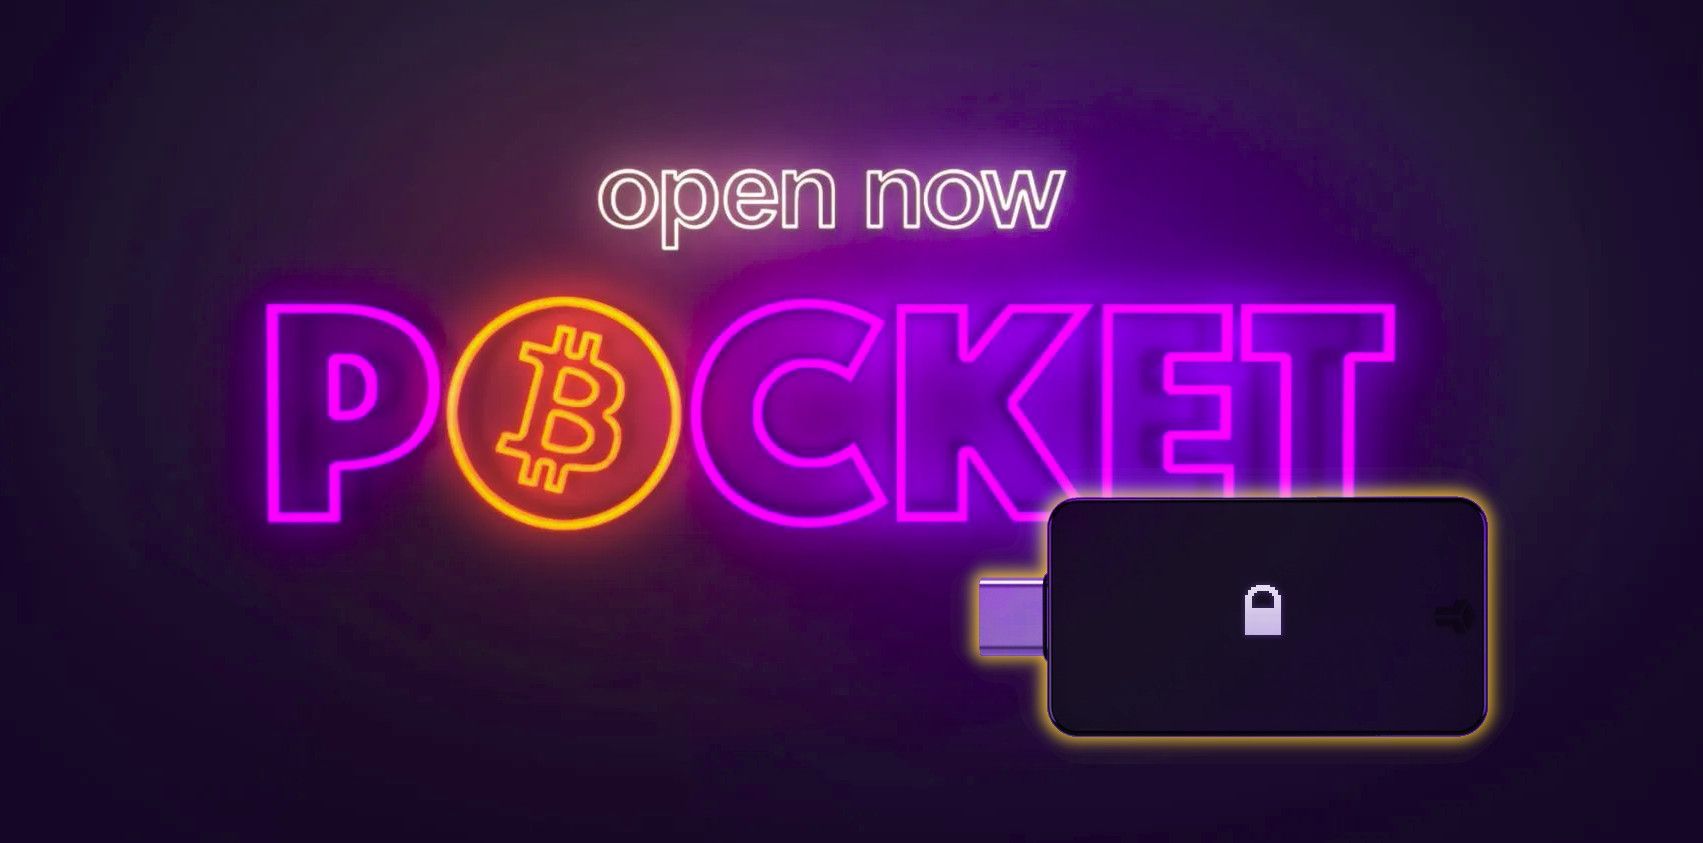 Stack bitcoin directly into your BitBox02 using Pocket